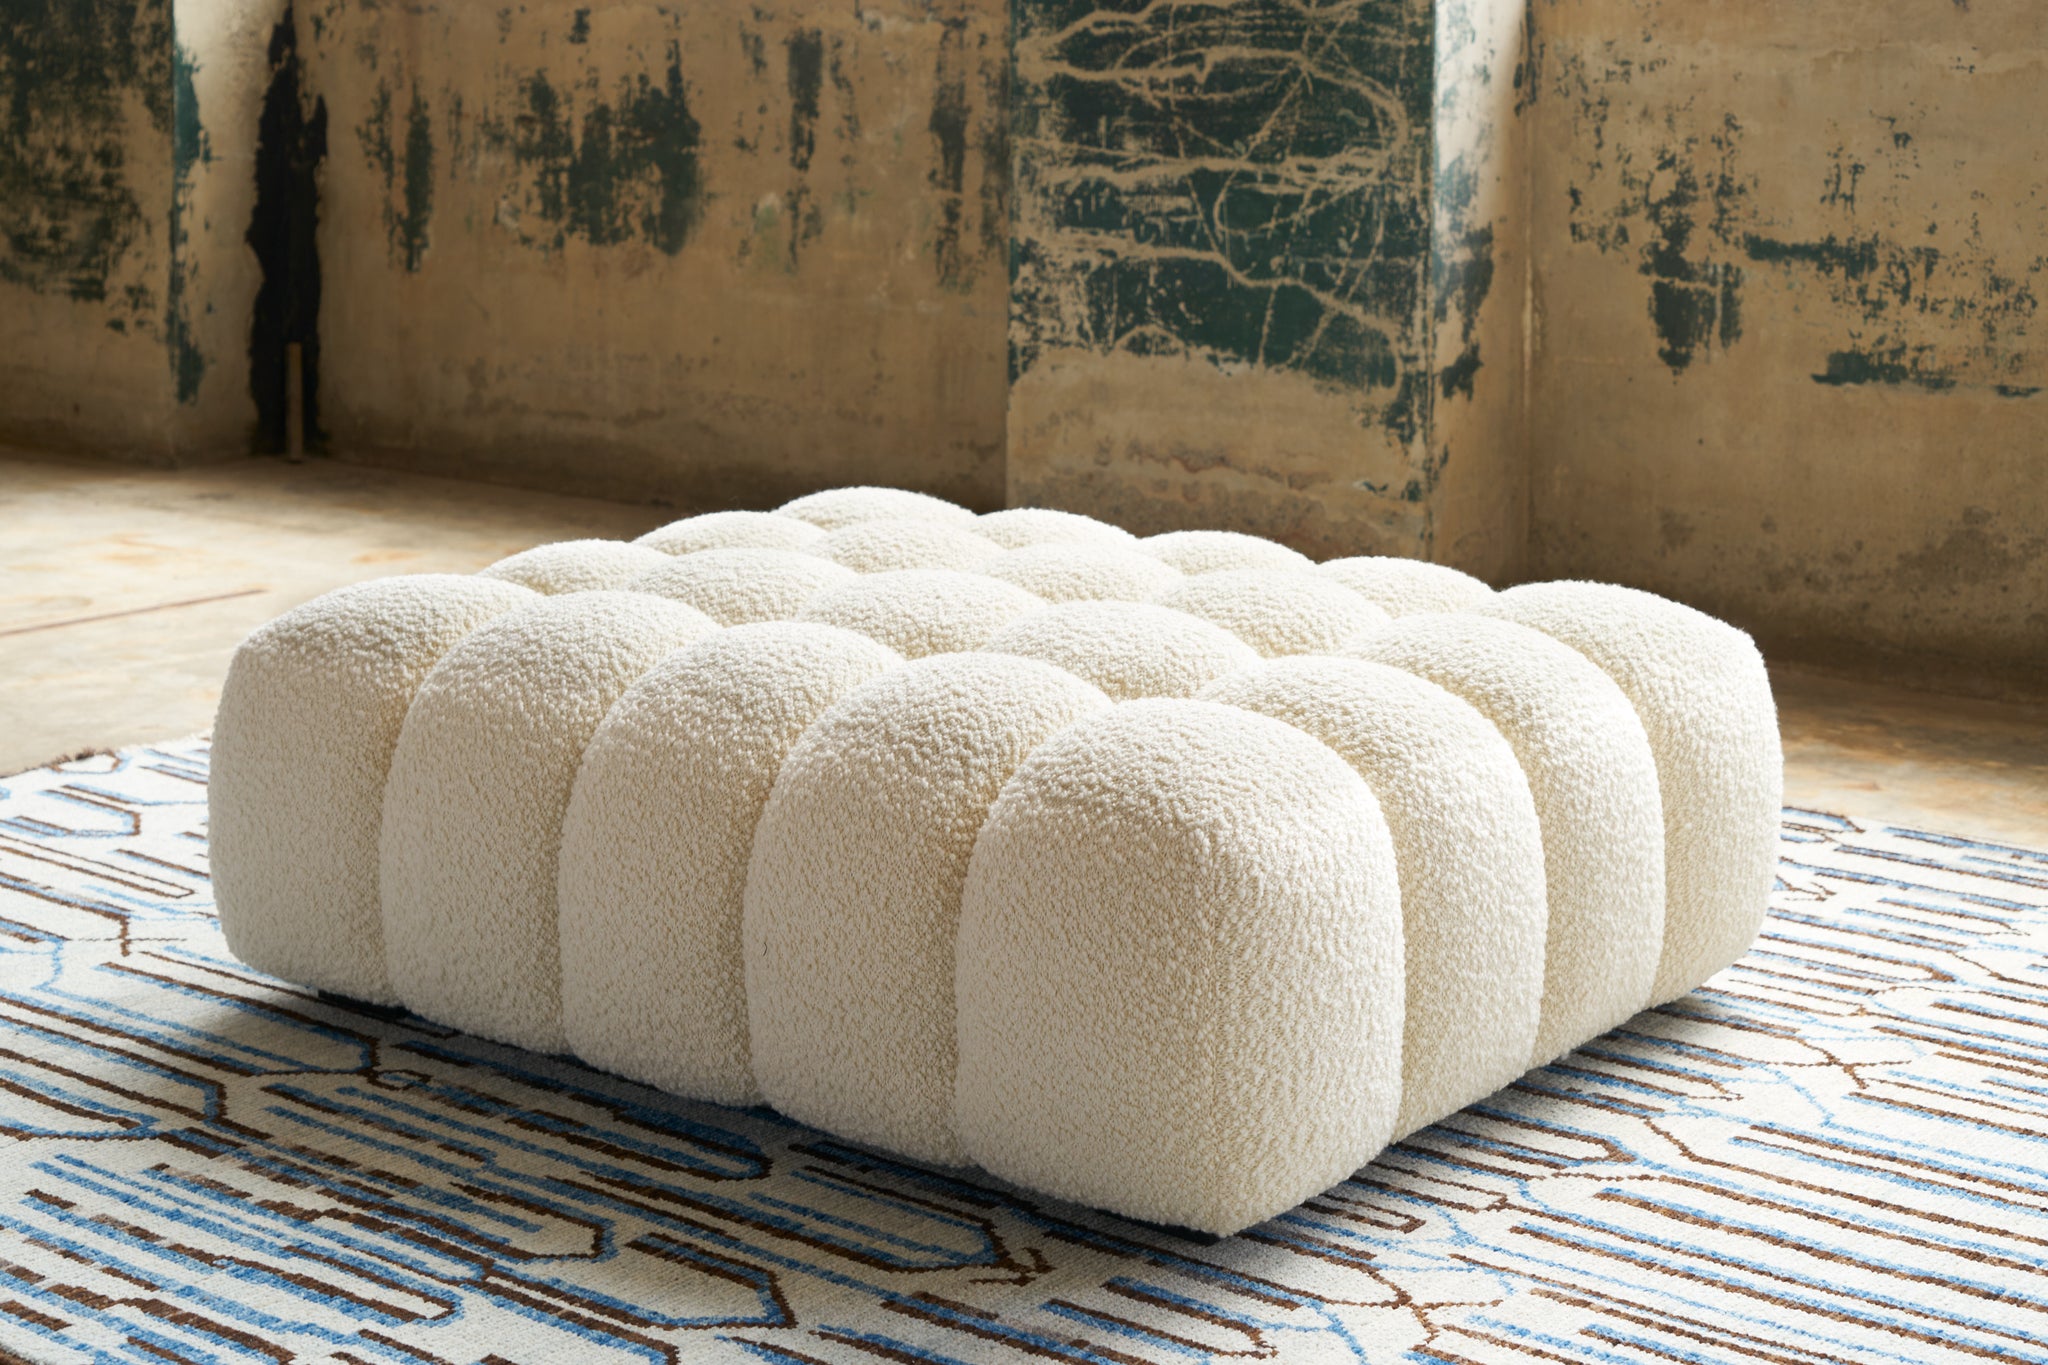  Cole Ottoman in Wooly White. Underneath is a textured tug. Photographed in Wooly White. 